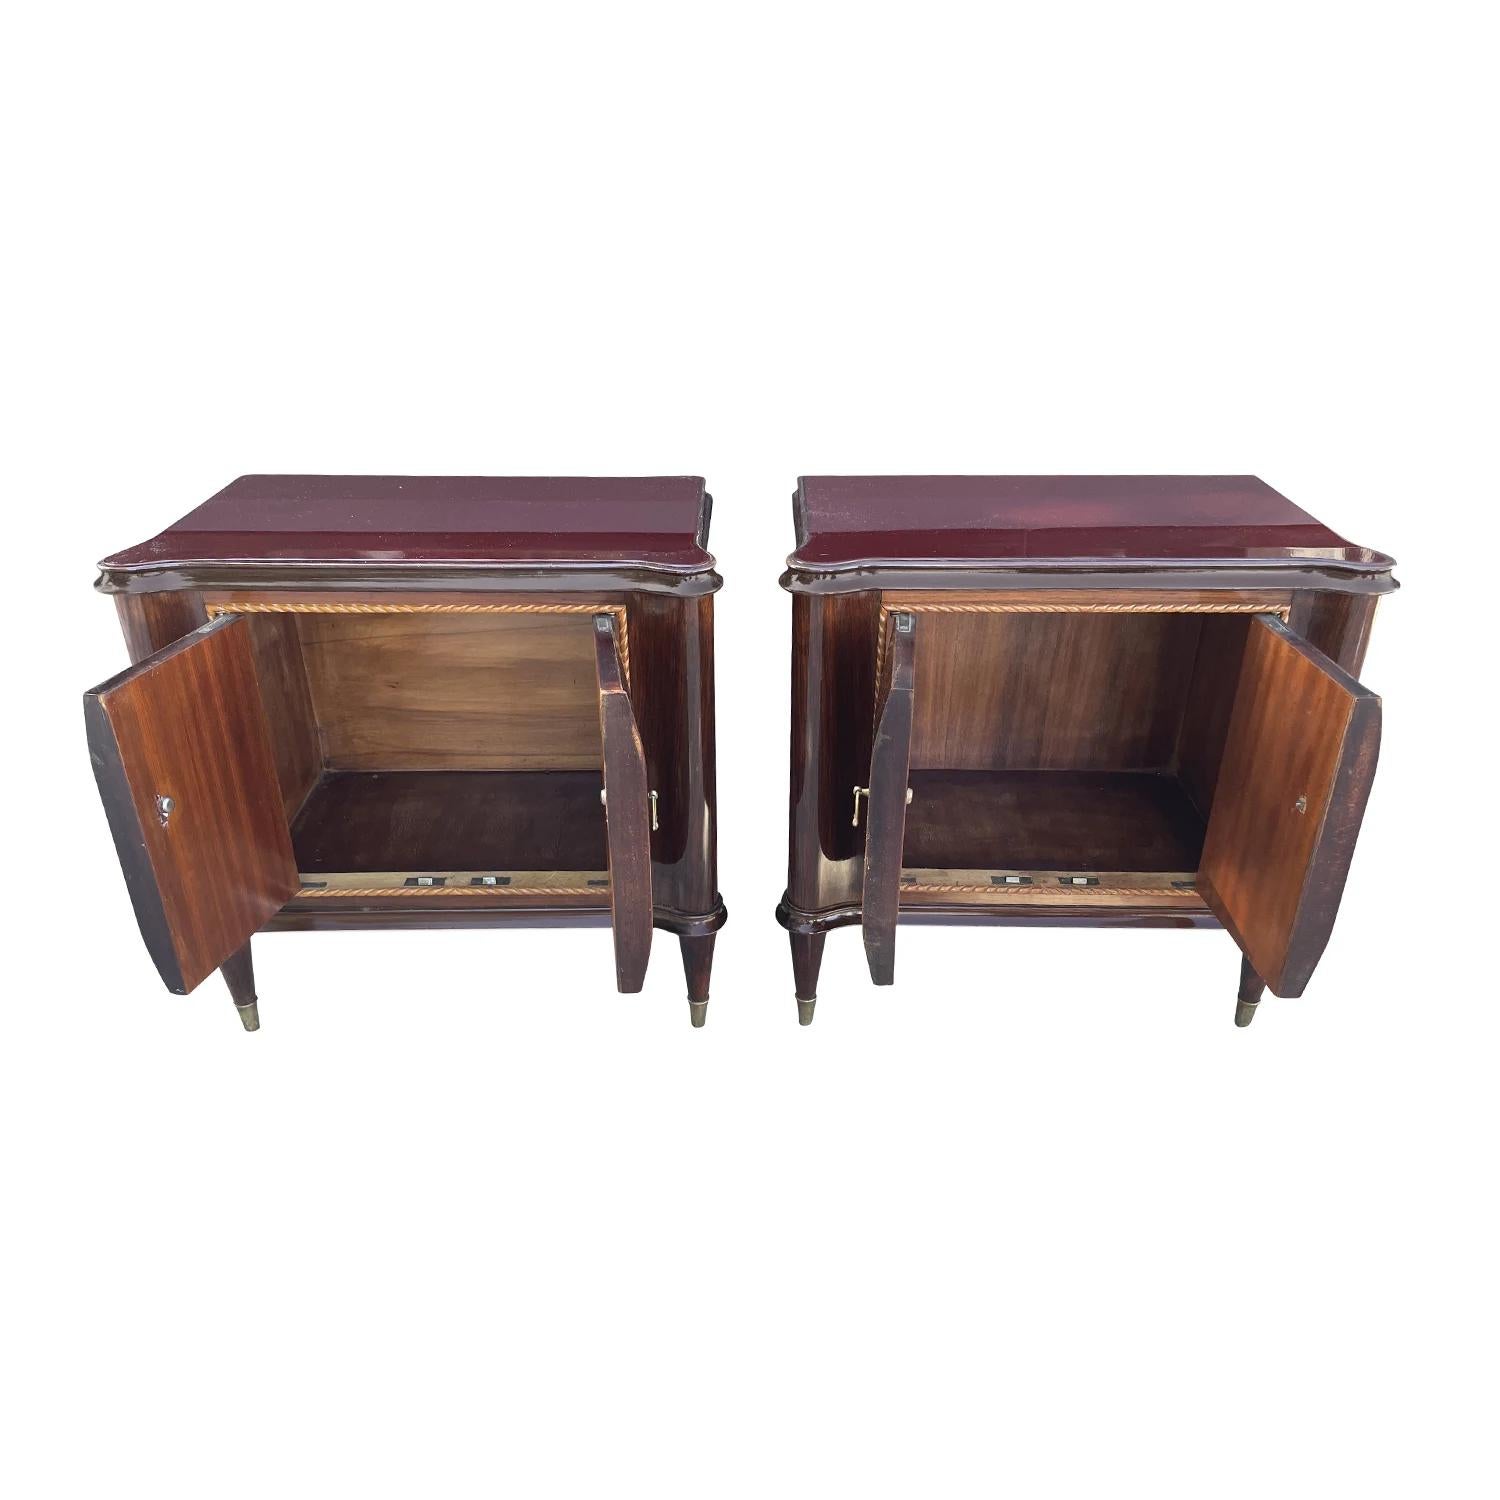 Polished 20th Century Italian Pair of Vintage Mahogany Bed Side Tables by Paolo Buffa For Sale